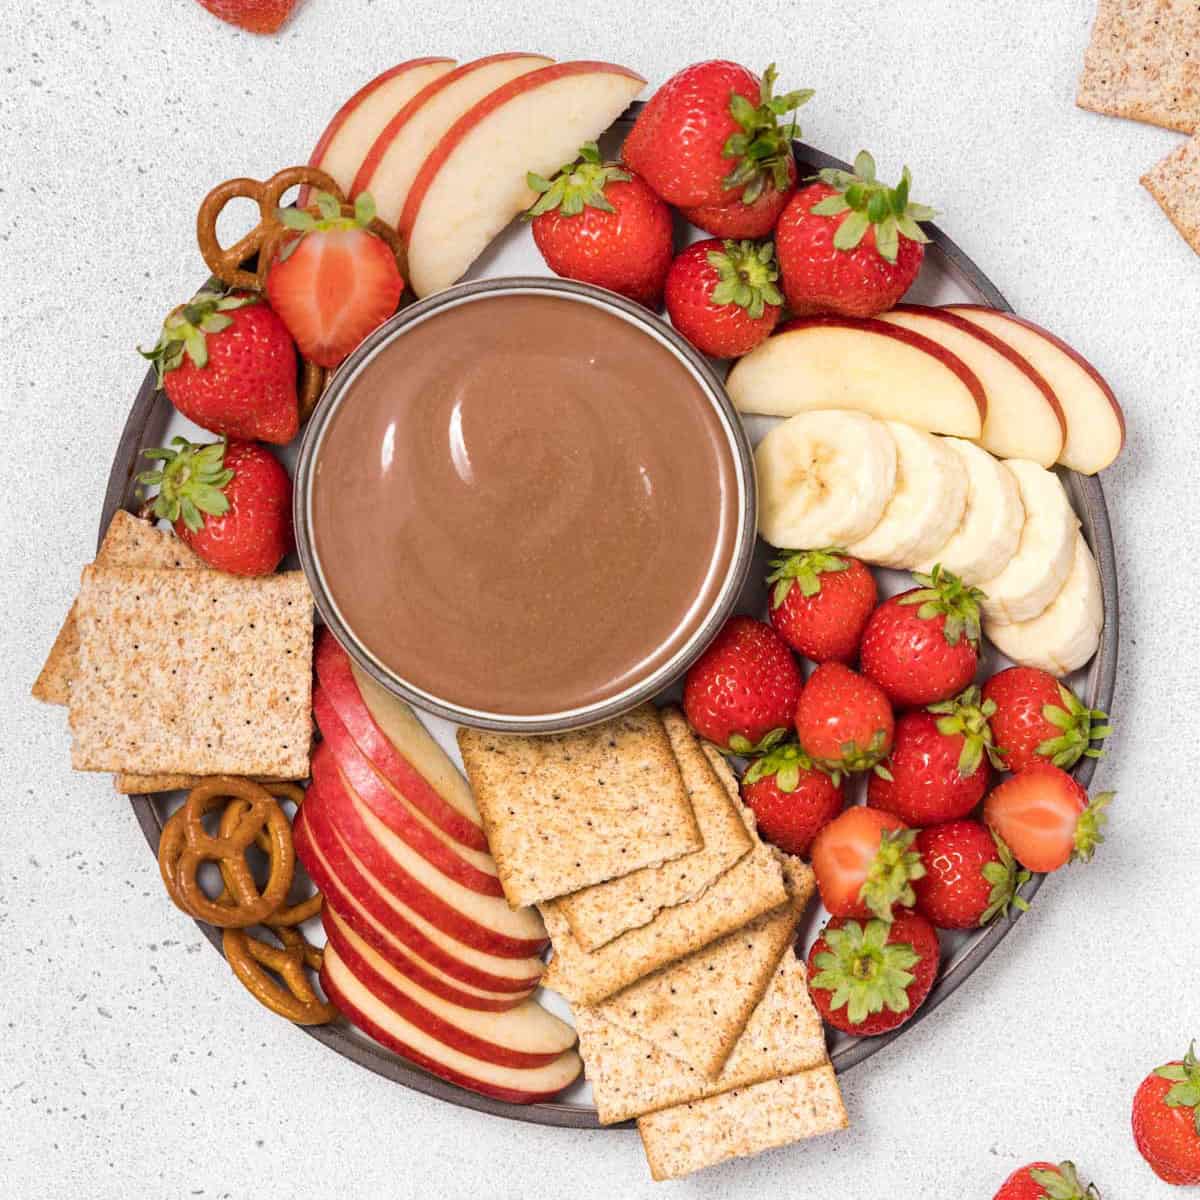 Top view yogurt dip in a bowl with crackers and fruits.